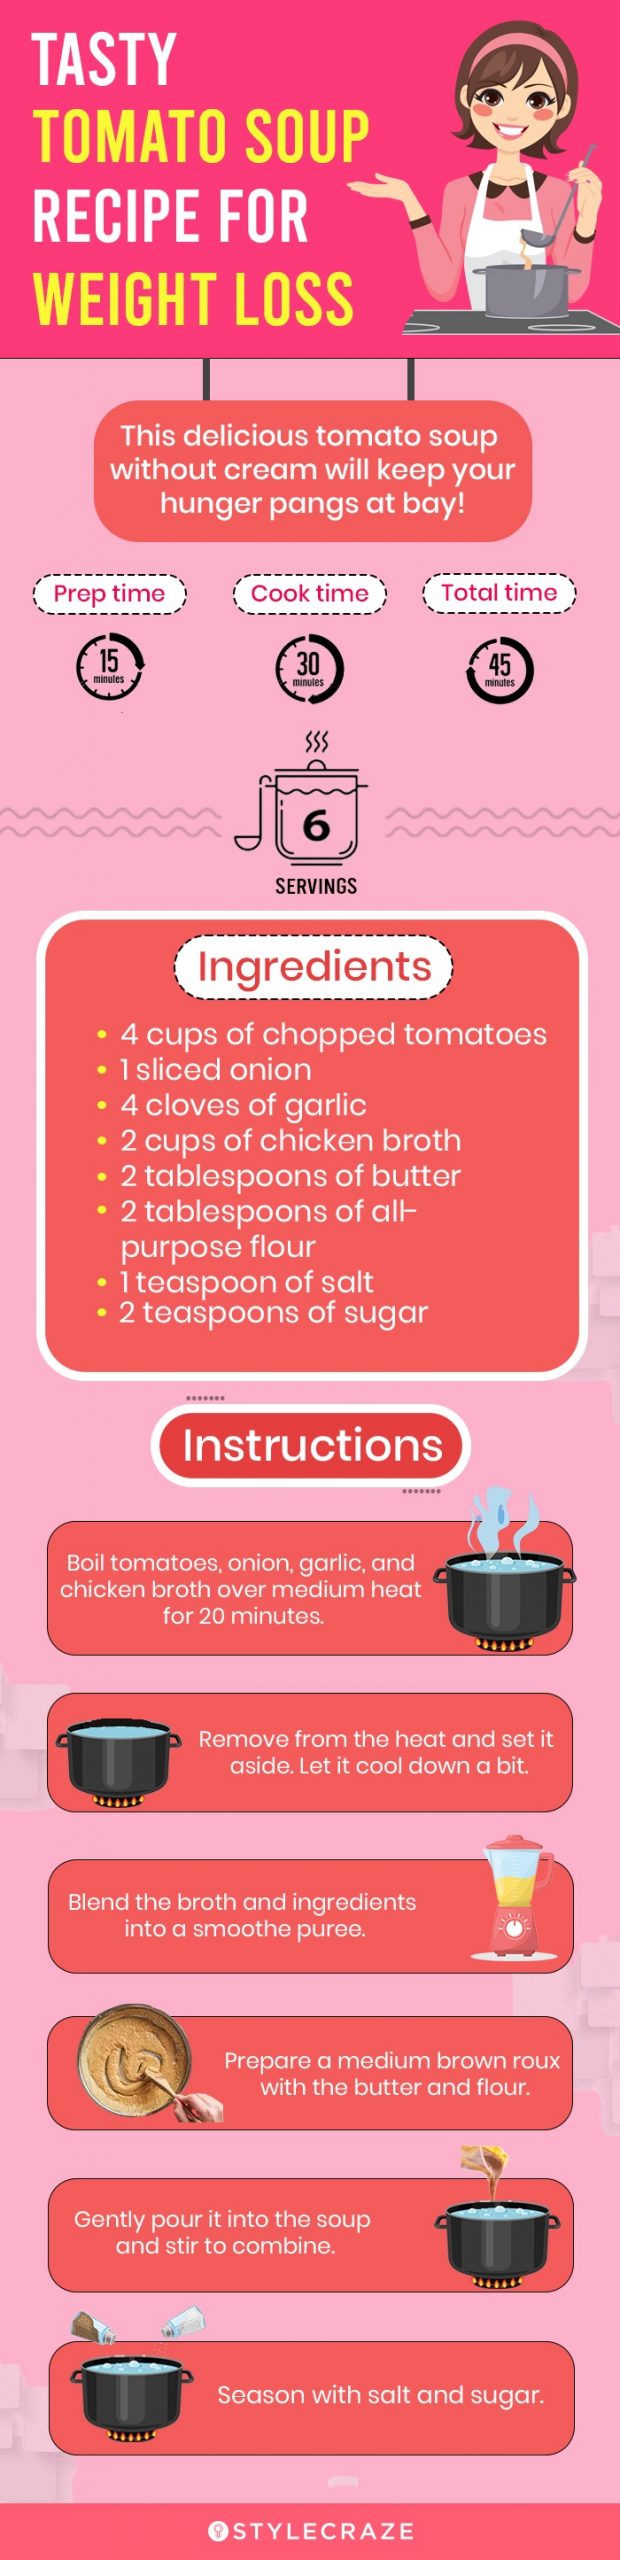 tasty tomato soup recipe for weight loss [infographic]